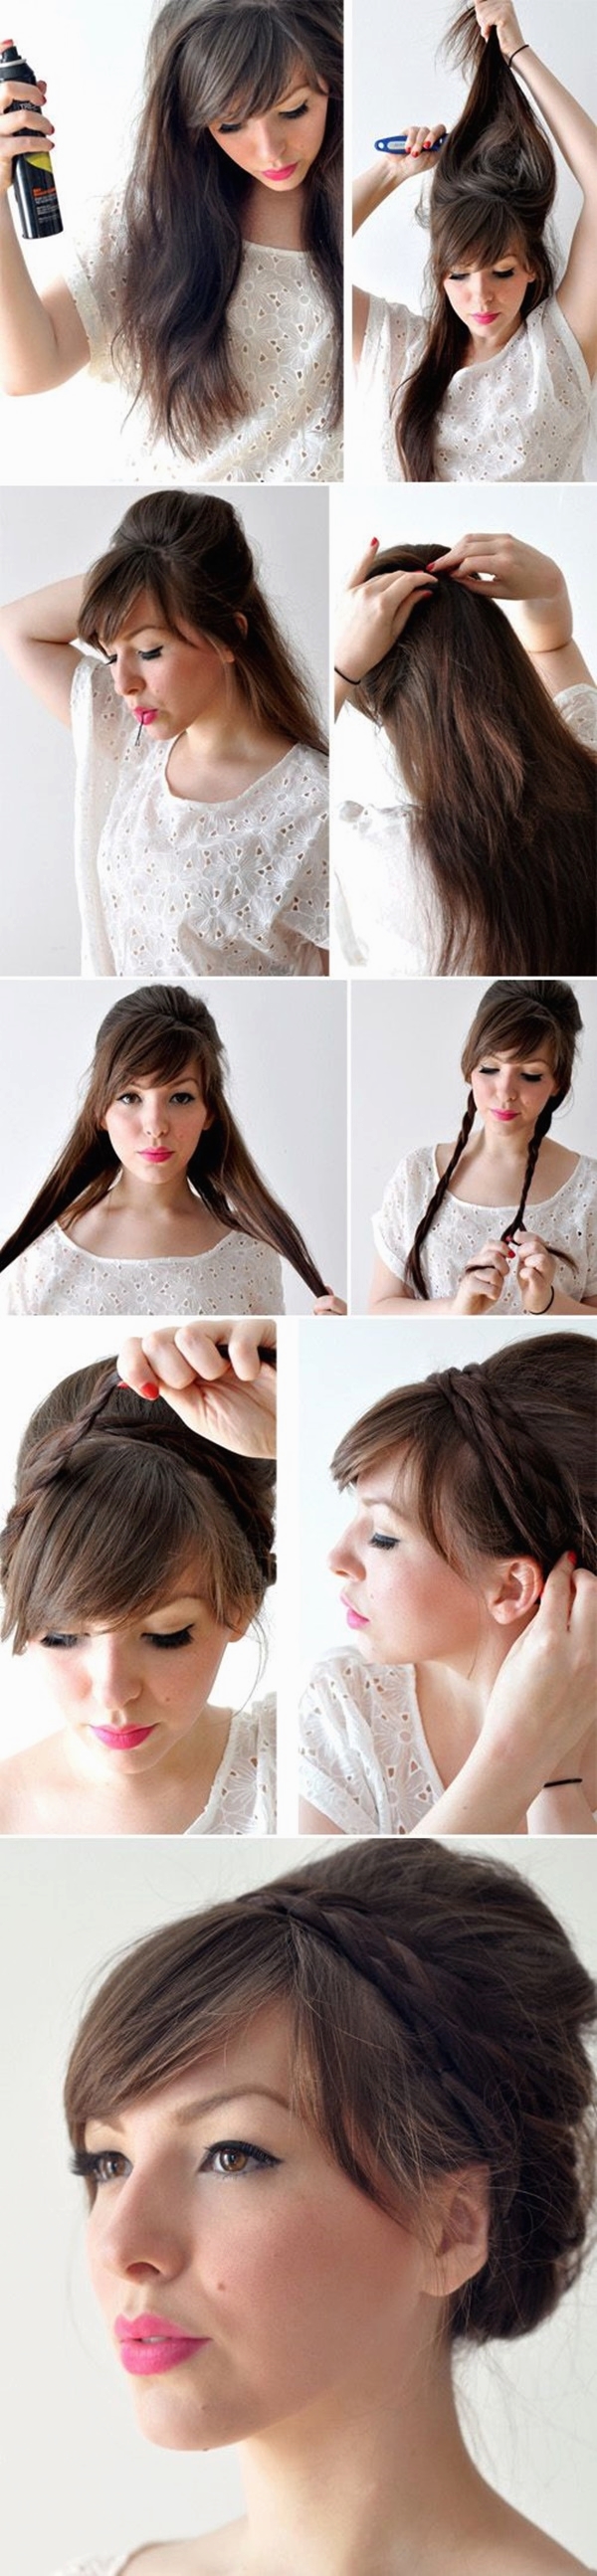 Easy Step By Step Hairstyles for Long Hair10